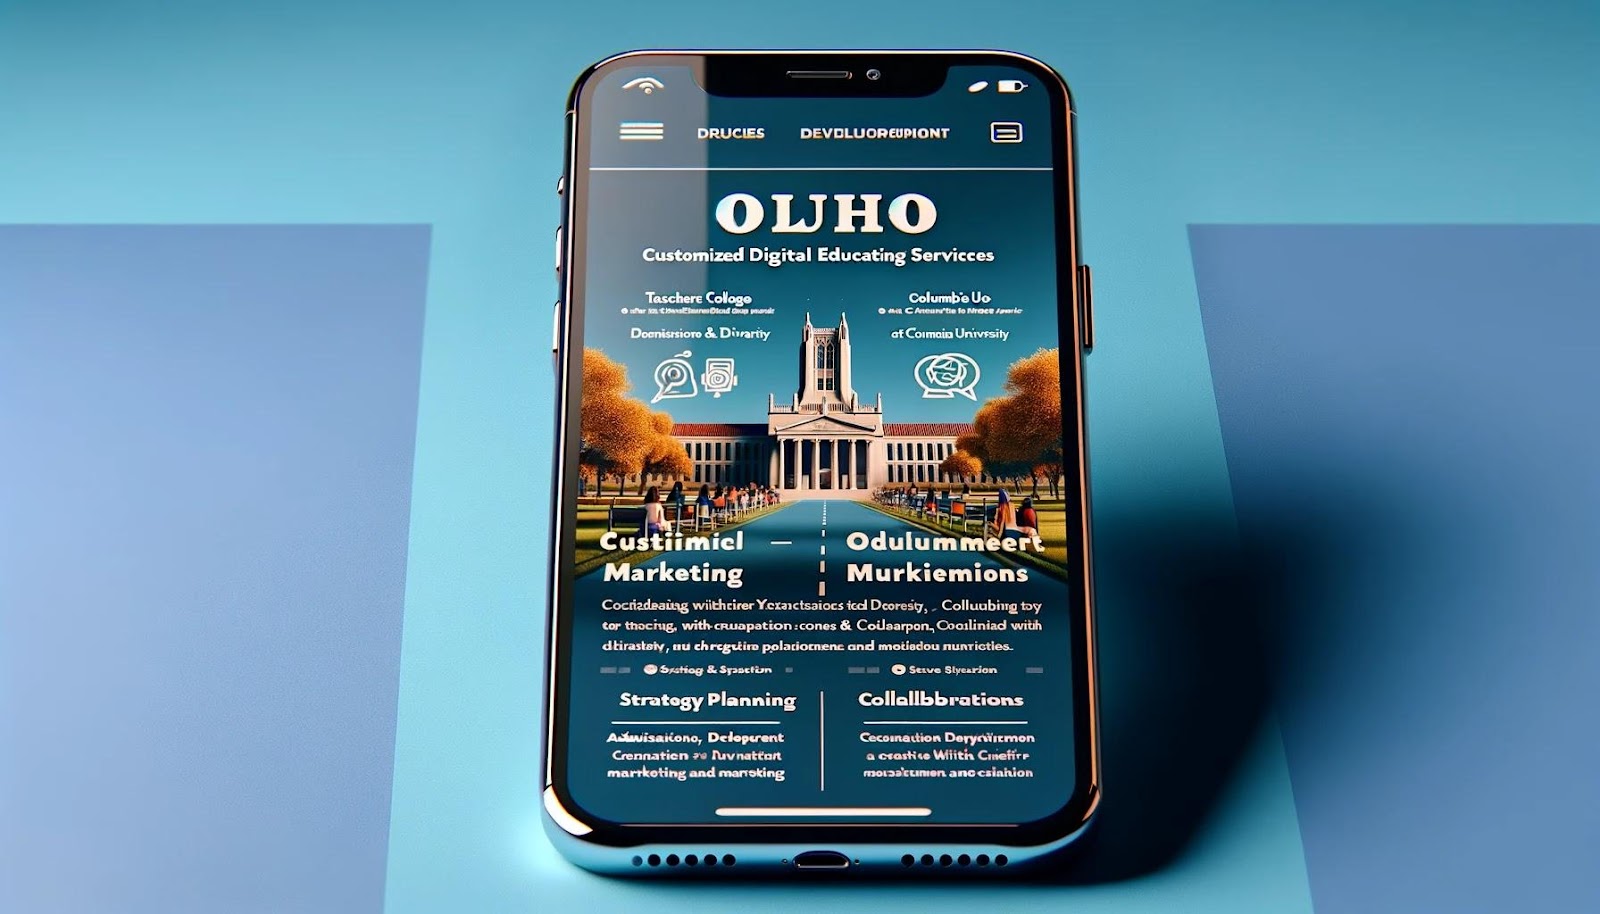 A widescreen image of a modern smartphone display, in the style of an iPhone, showing a webpage for a digital marketing company called OHO. The webpage focuses on services for higher education institutions. It includes sections on customized digital marketing services, a case study of success with Teachers College at Columbia University, and collaborations with admissions & development departments, as well as creative and content teams. The webpage also highlights strategy planning, execution, measurement, and optimization of marketing channels. The design should be sleek and professional, resembling a real webpage.